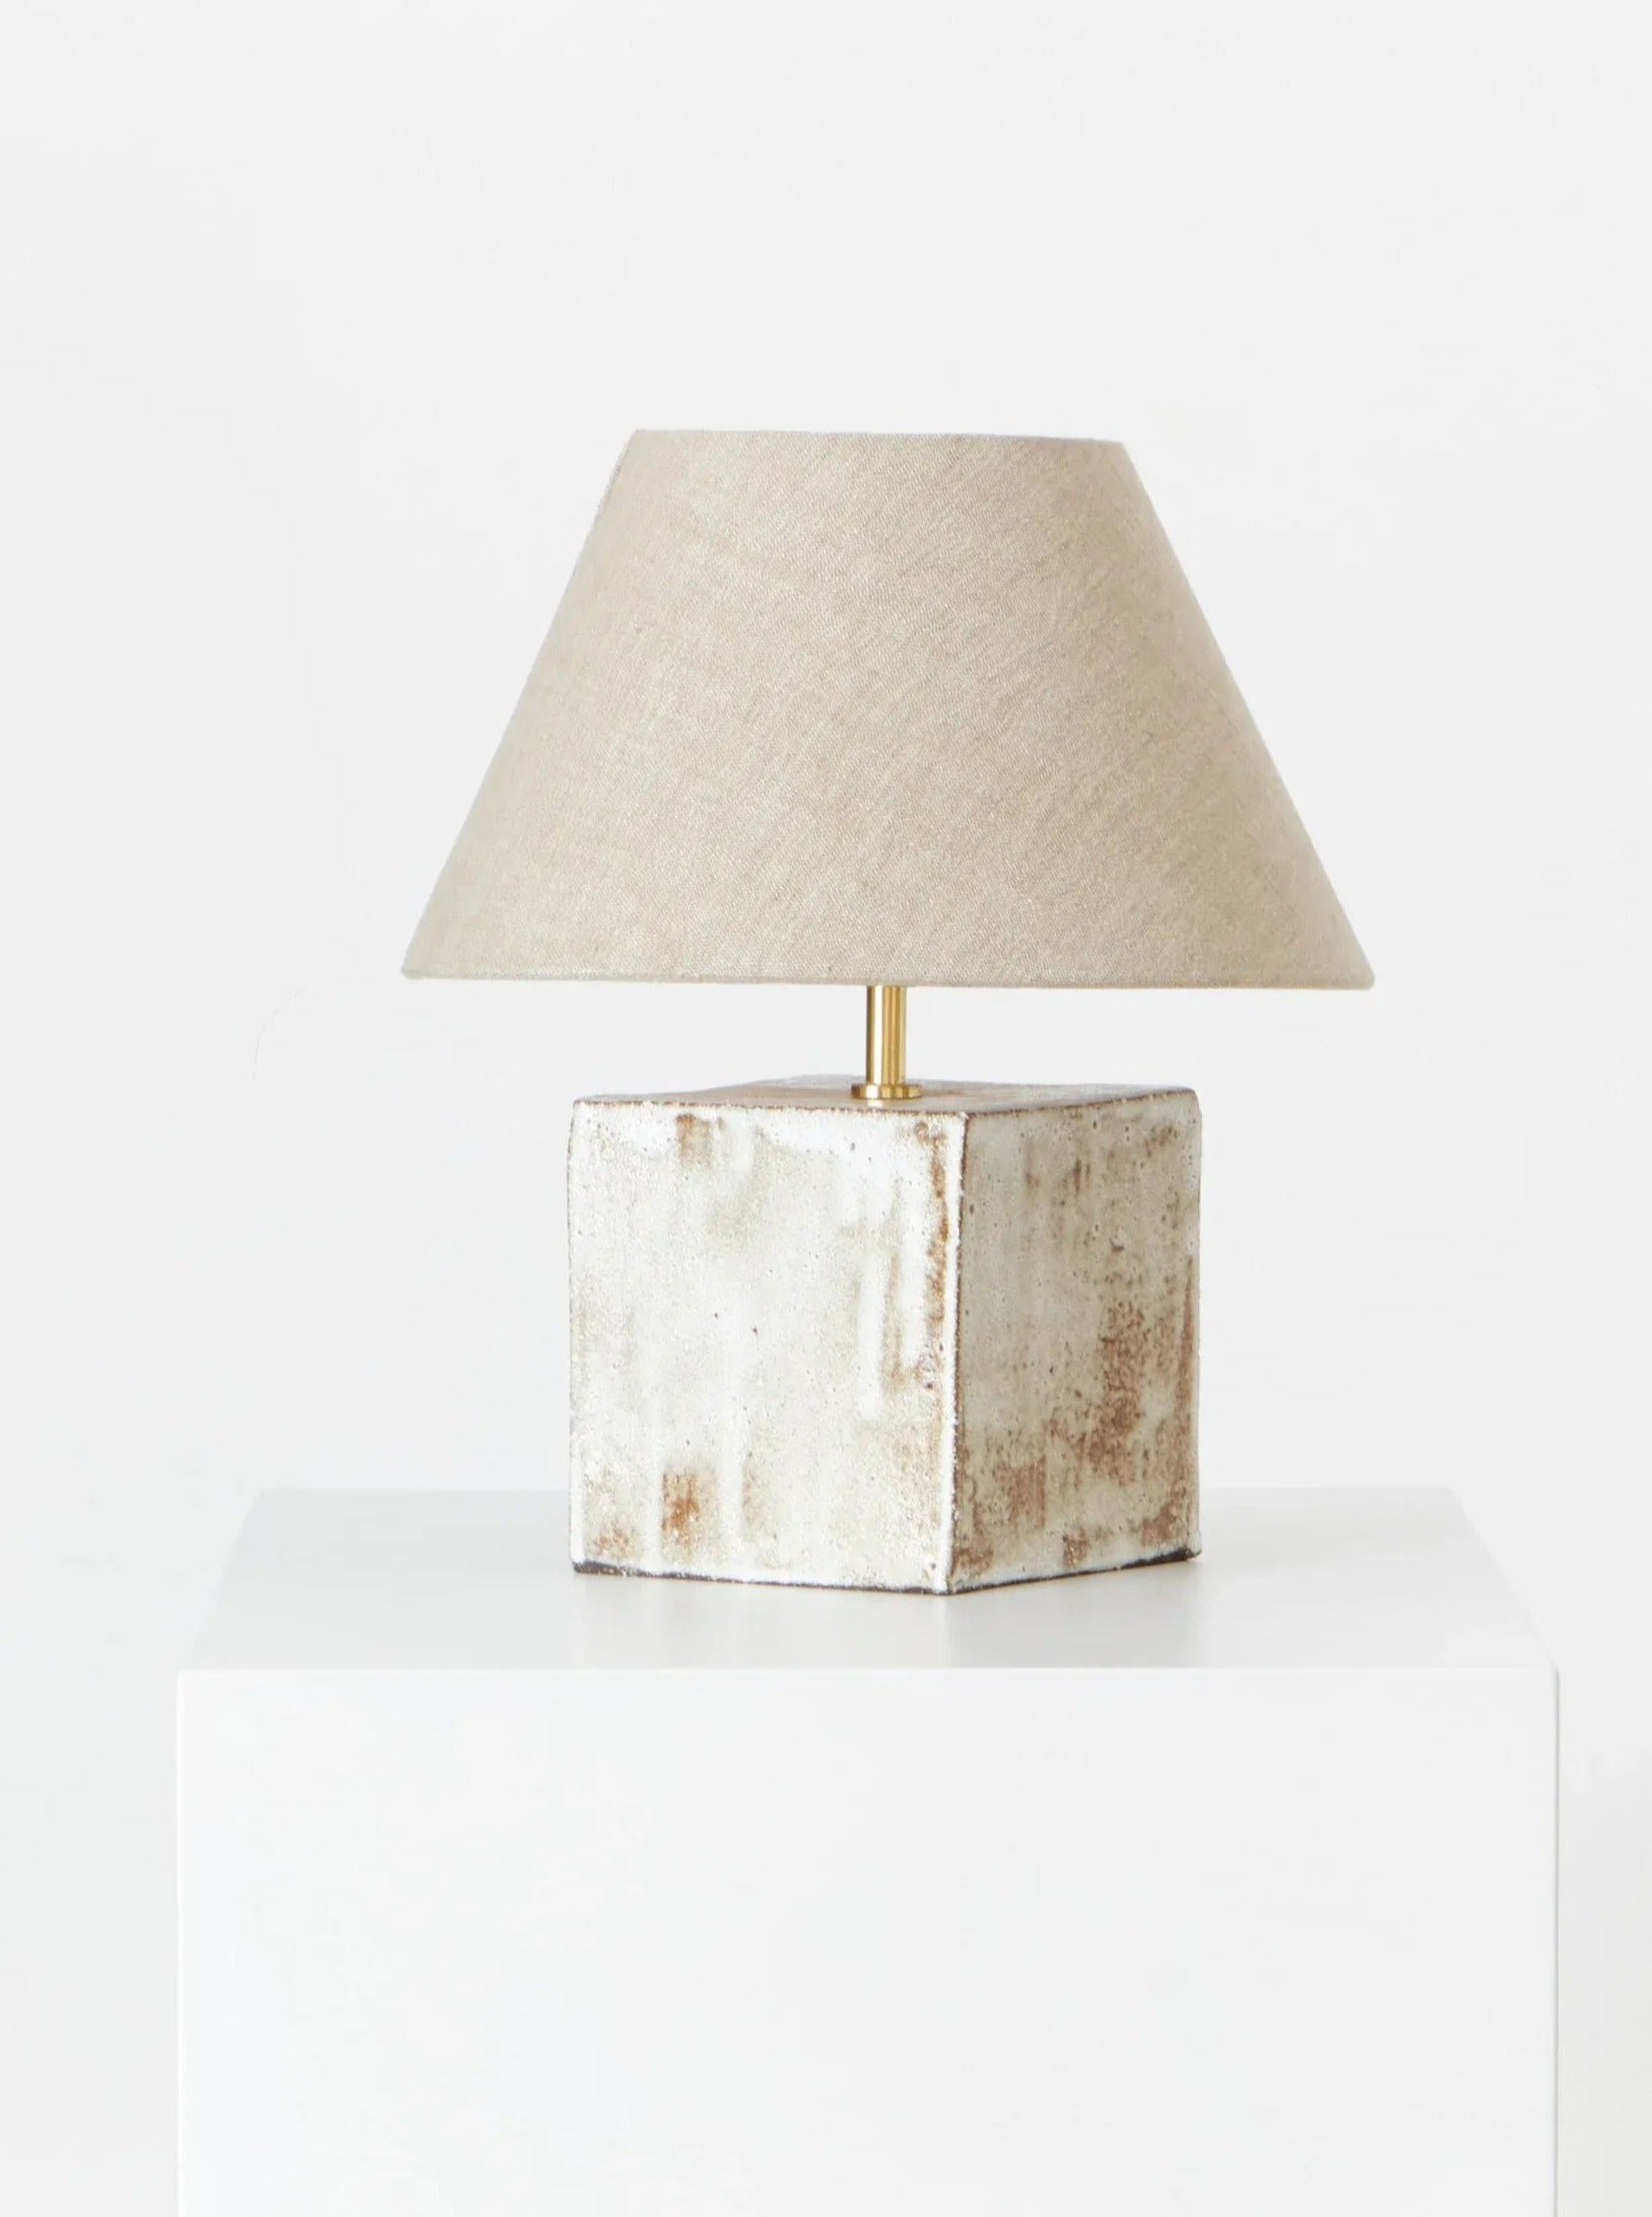 Modern Arouca Table Light with minimalist design, perfect for contemporary interiors